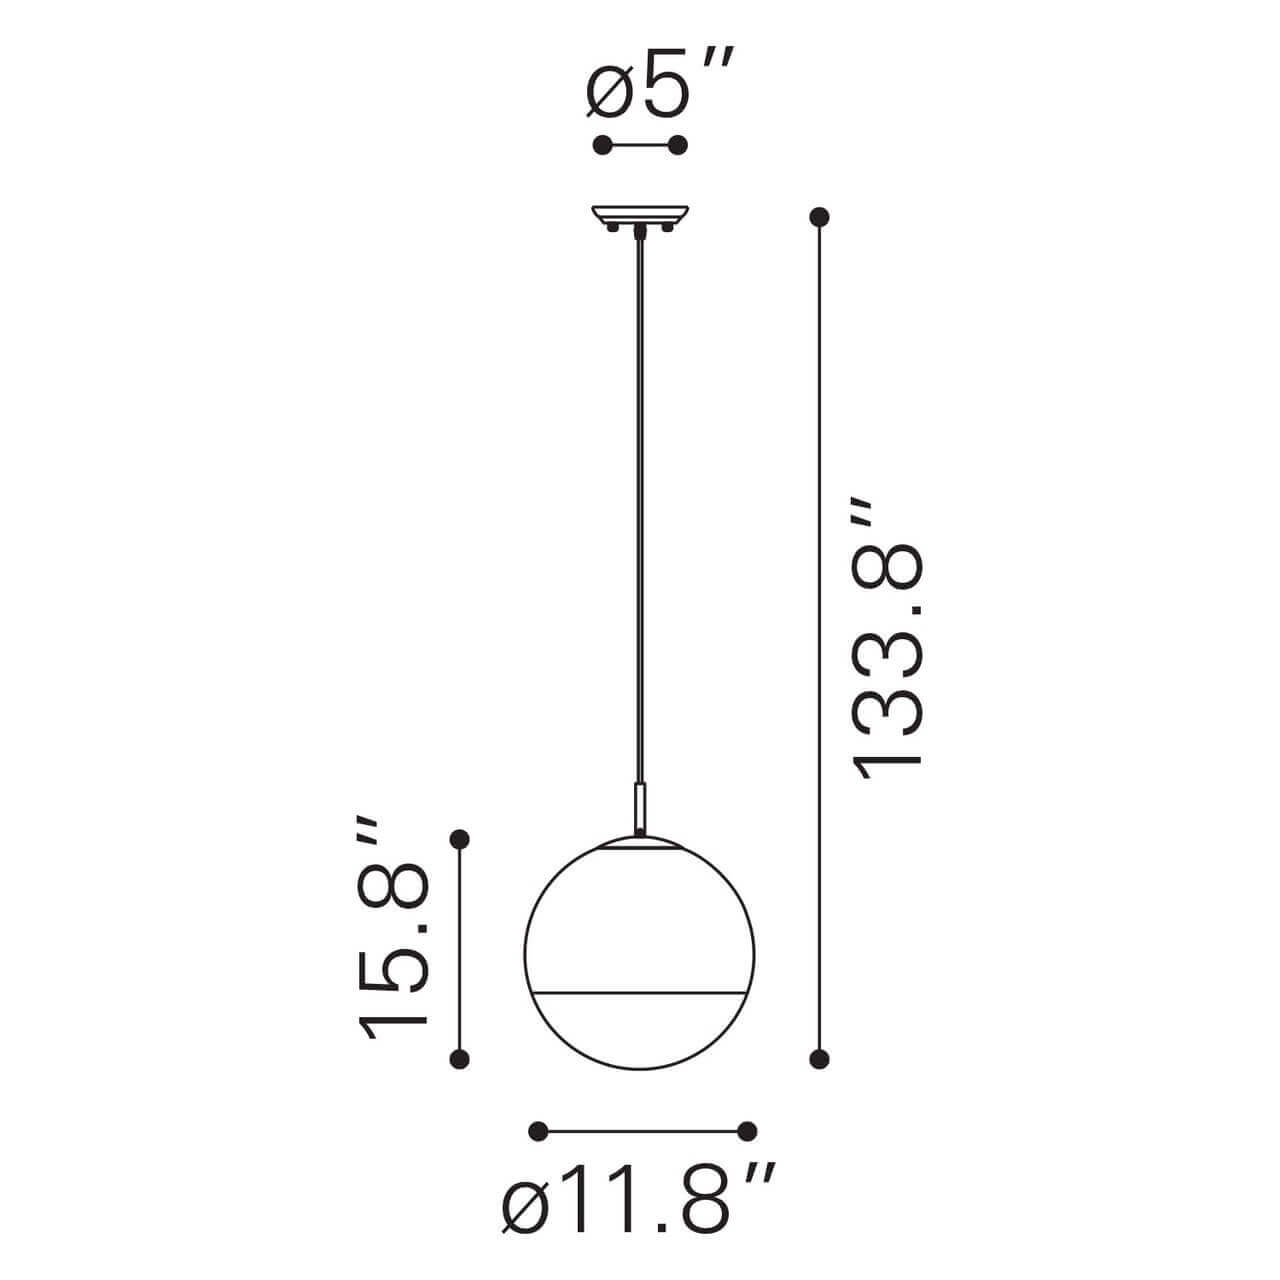 Reading lamp dimensions view